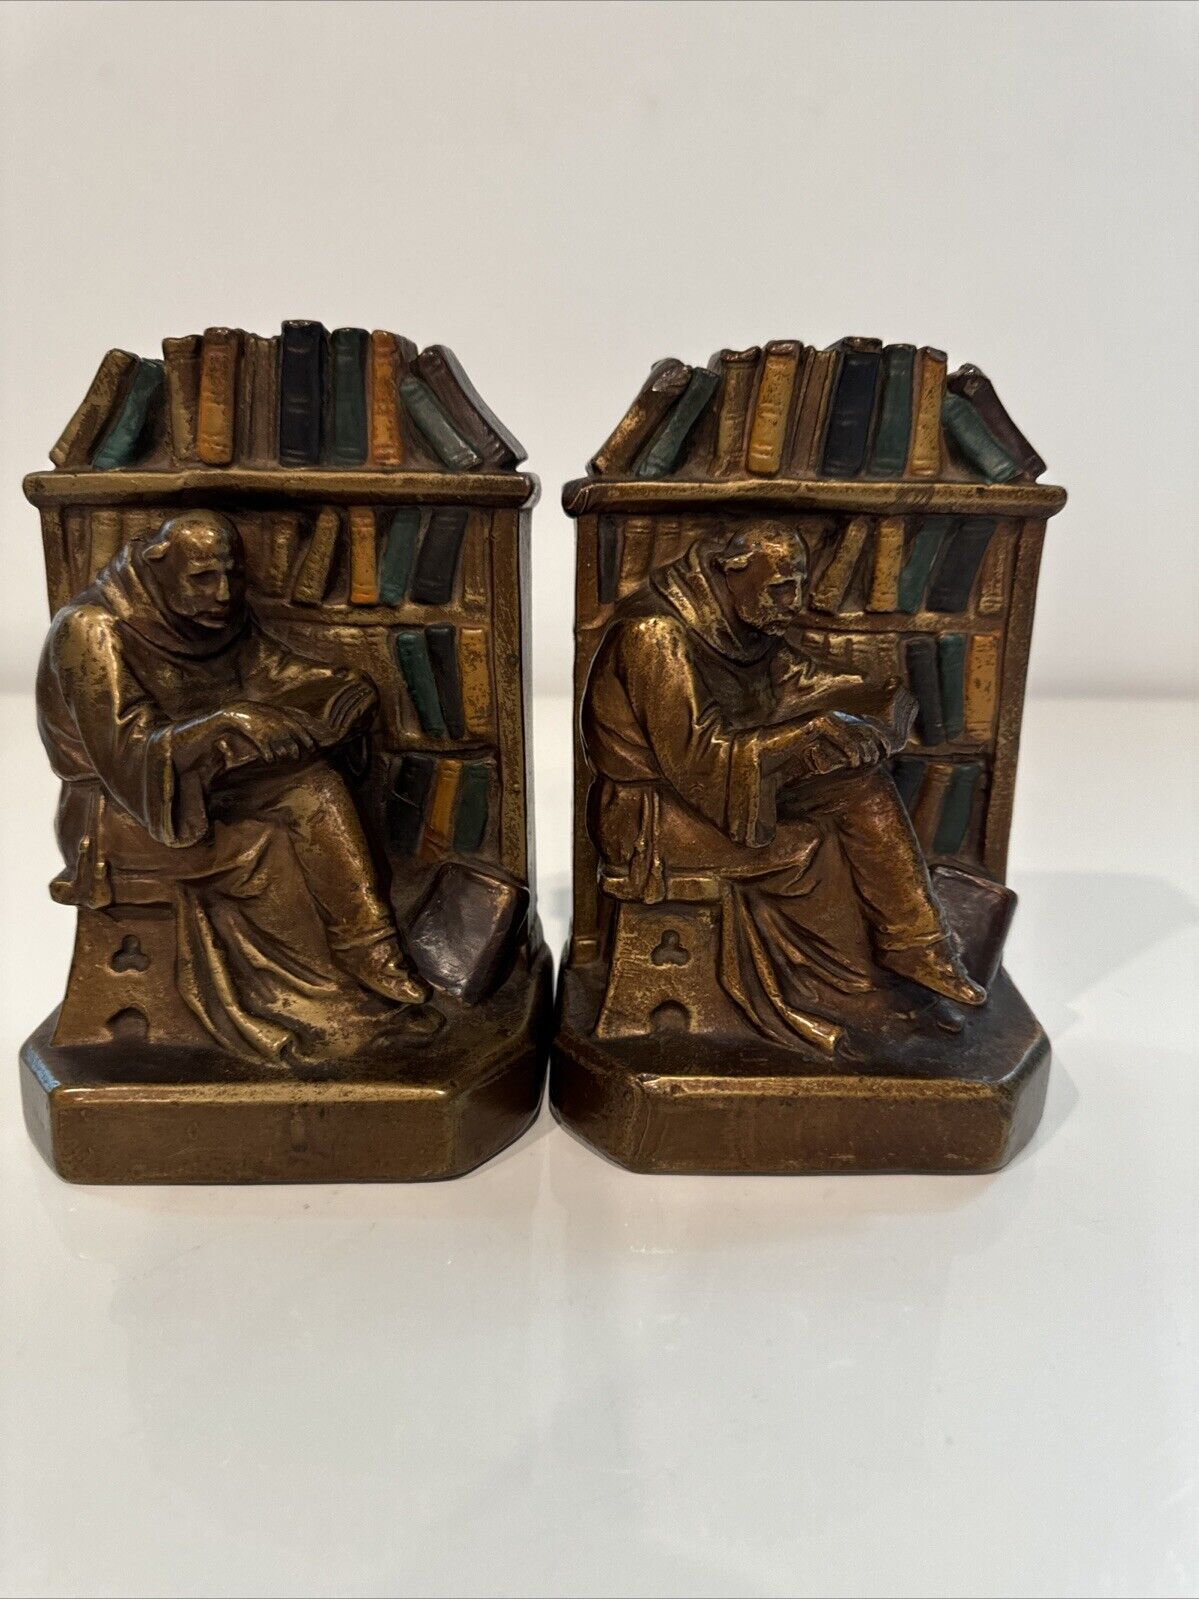 EARLY 1900's BRONZE CLAD ~ STUDIOUS MONK BOOKENDS